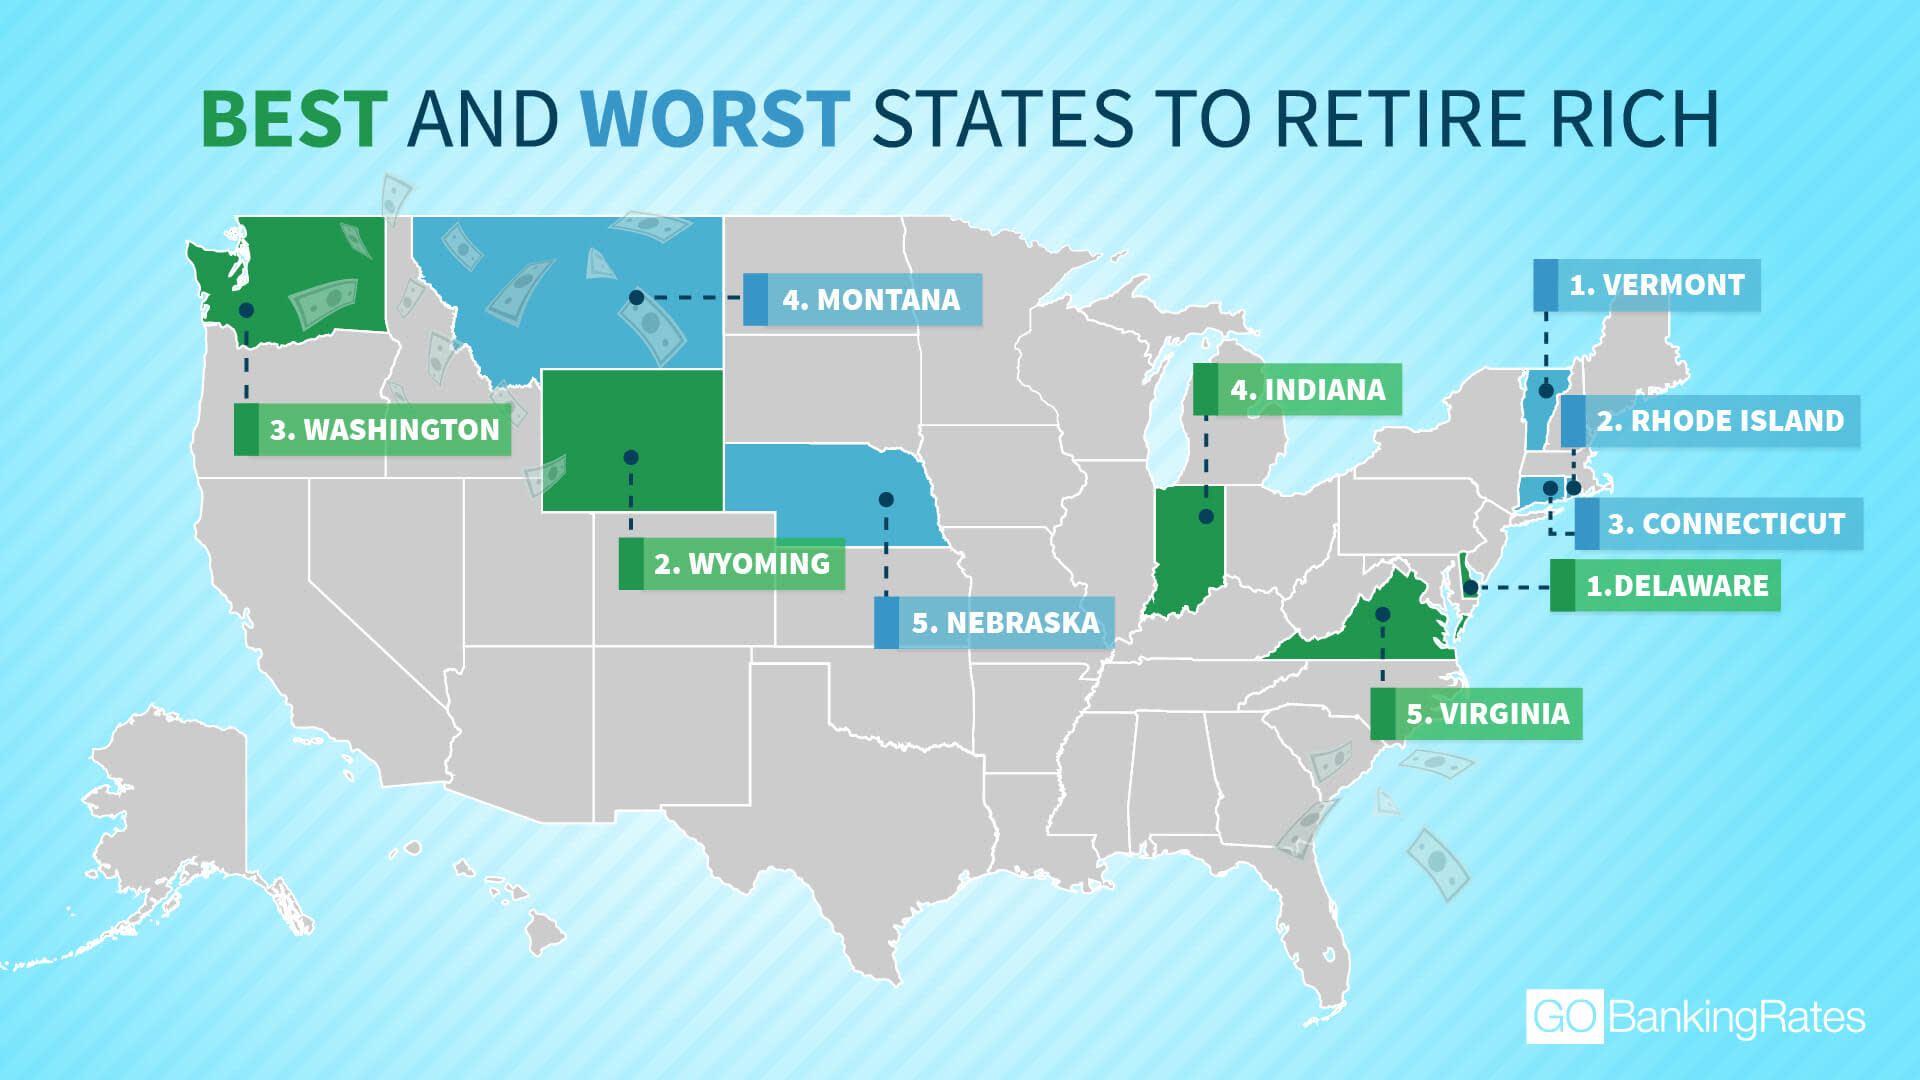 Want to Retire Rich? Avoid These 10 States, Study Says